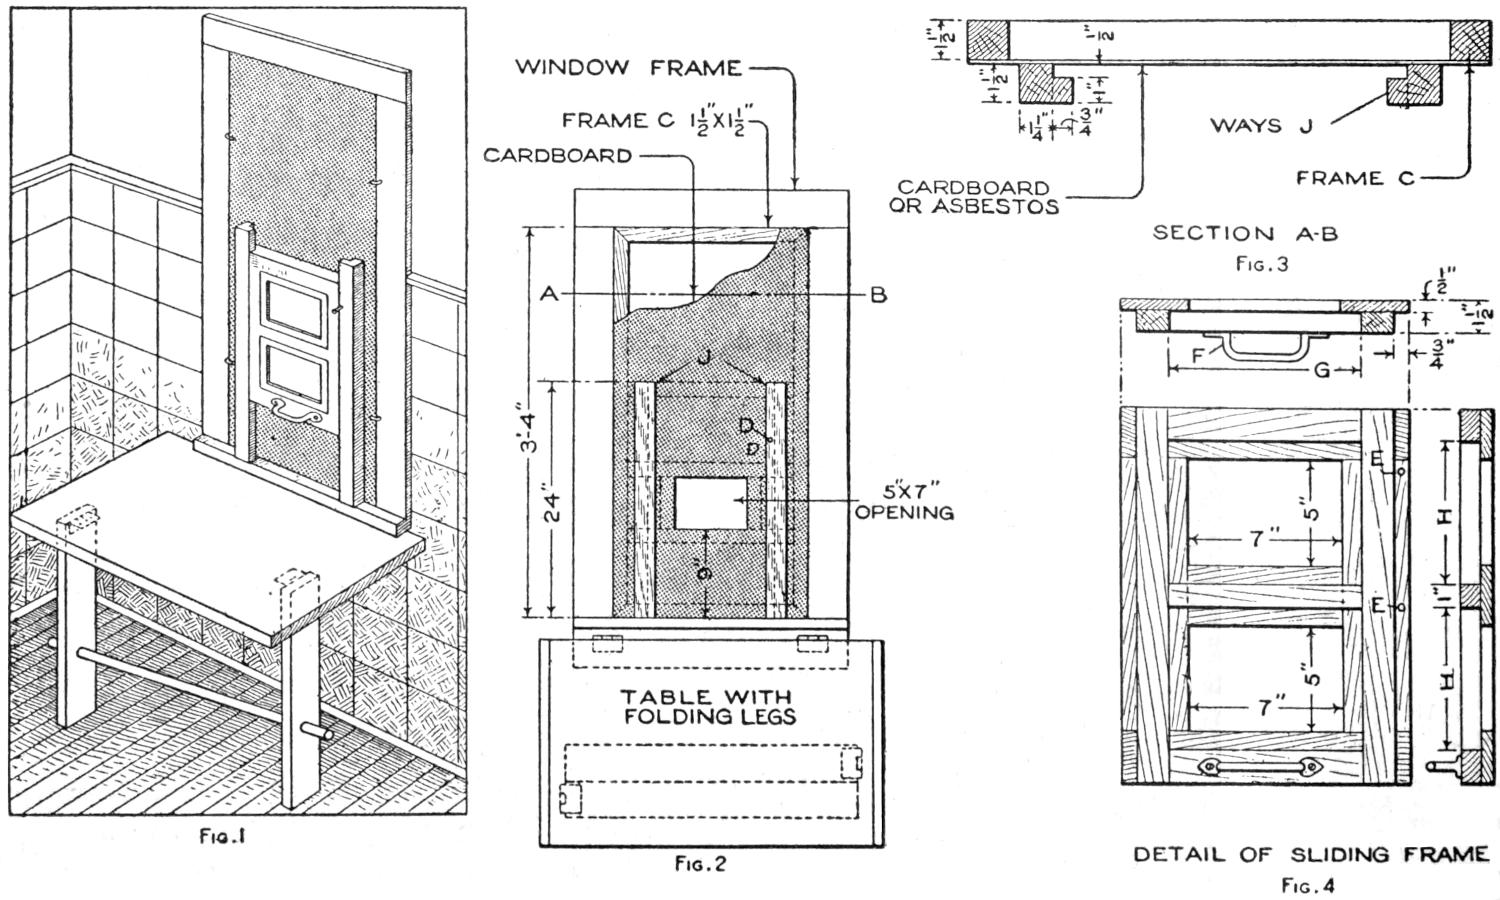 Details of table and window frame construction